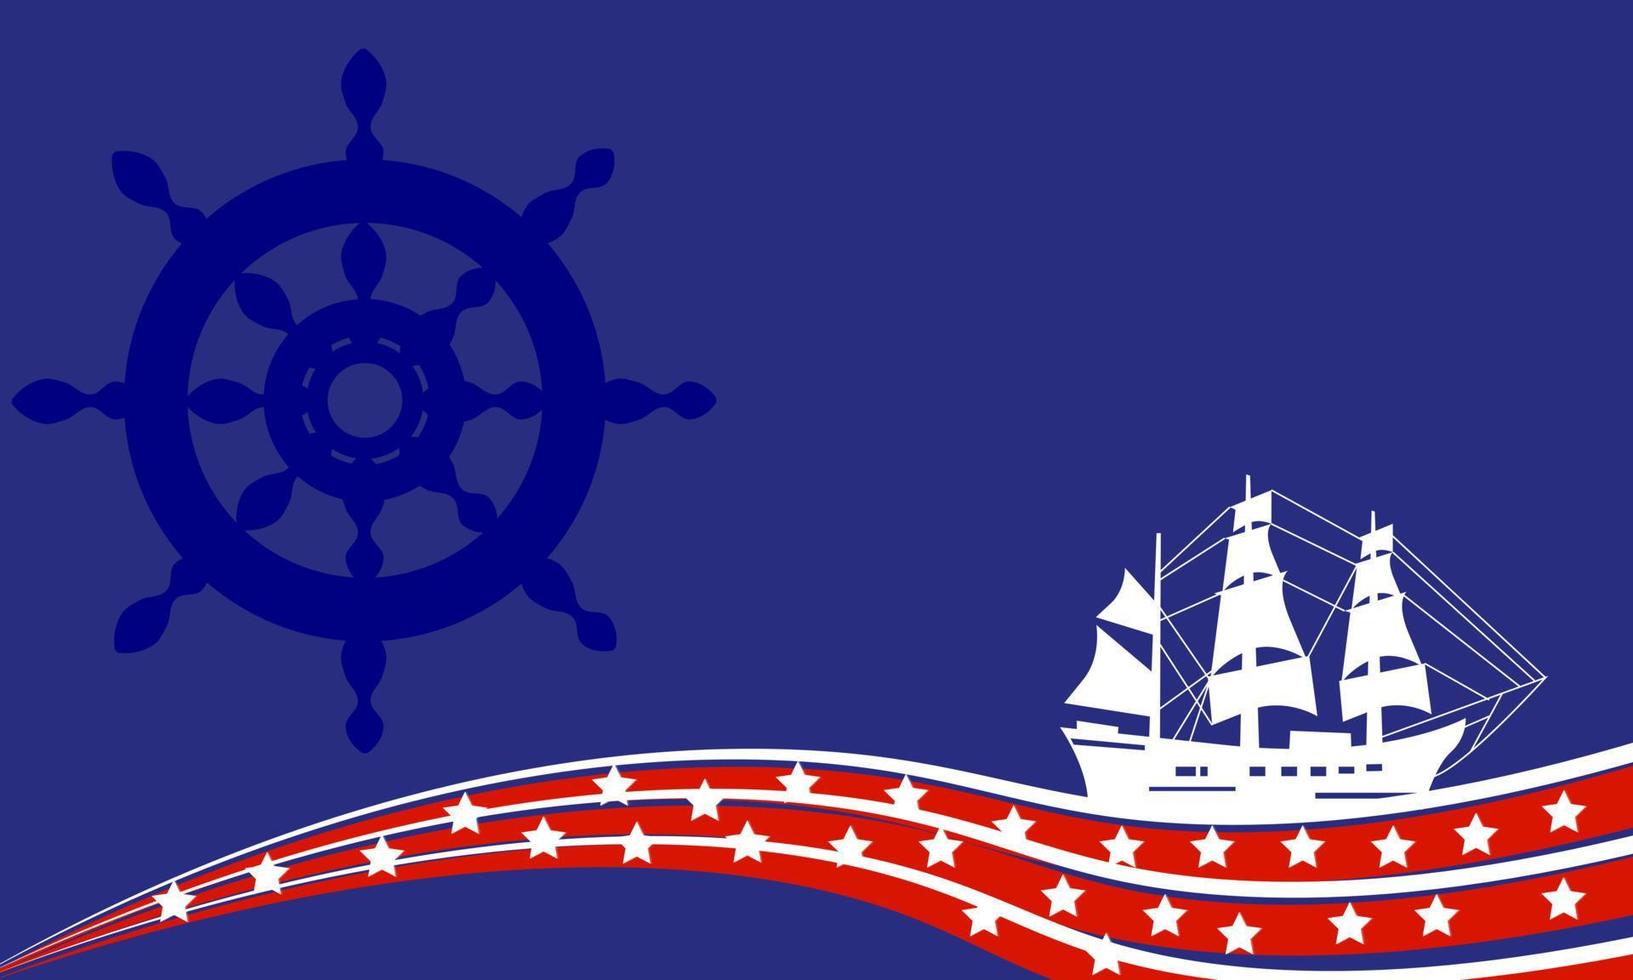 Columbus Day Background with Ship Silhouette, Steering Wheel, star elements and Copy Space Area. Suitable to be placed on content with that theme. vector